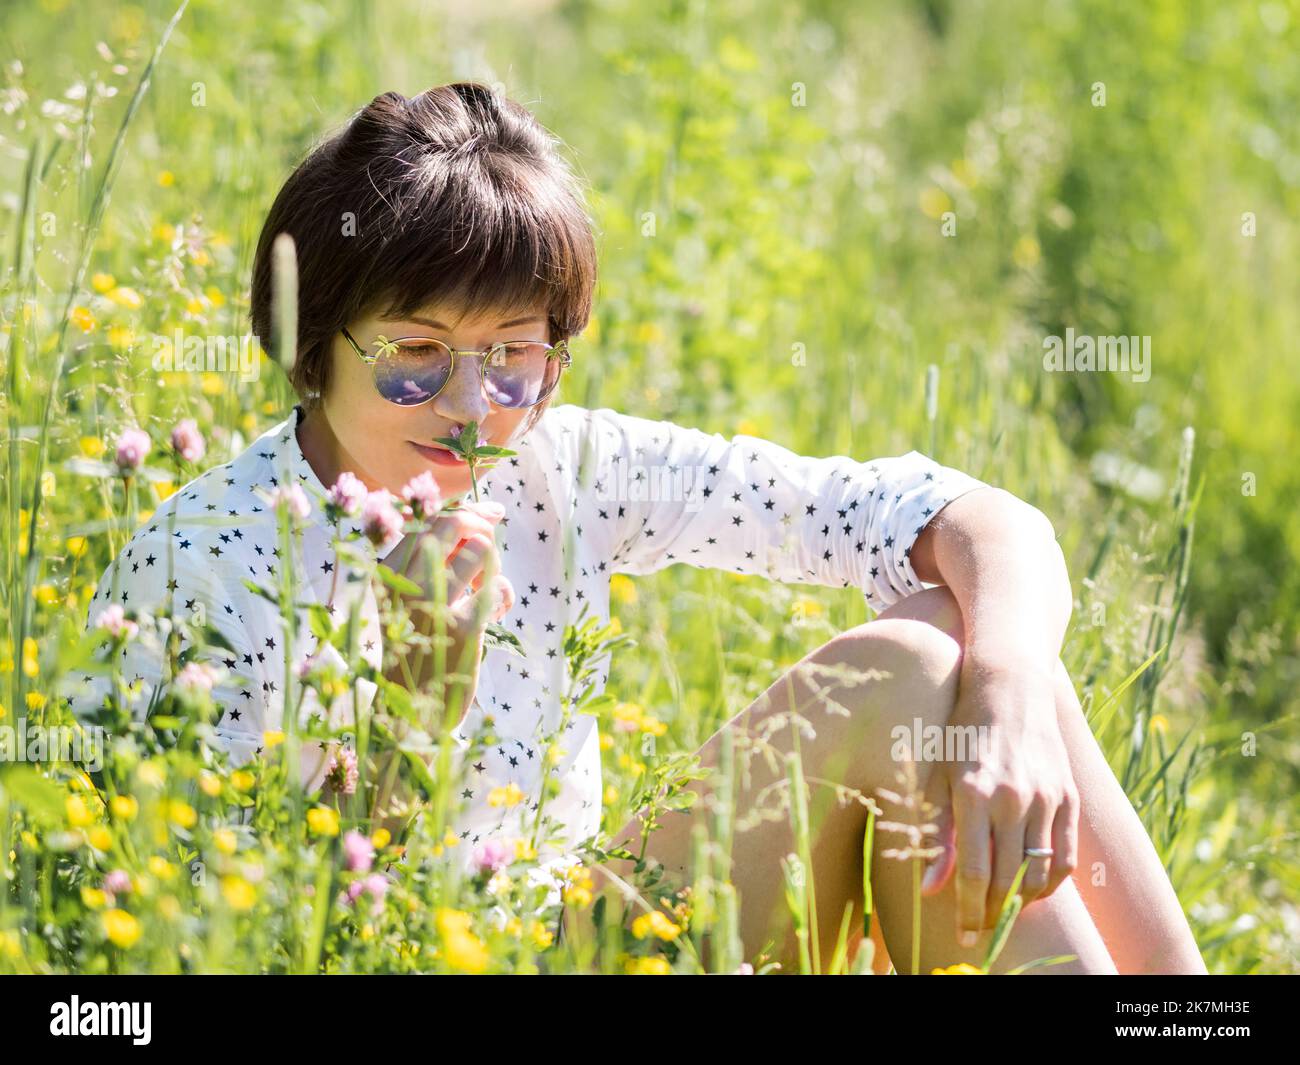 Woman in sunglasses, enjoys sunlight and flower fragrance on grass field. Summer vibes. Relax outdoors. Self-soothing. Stock Photo